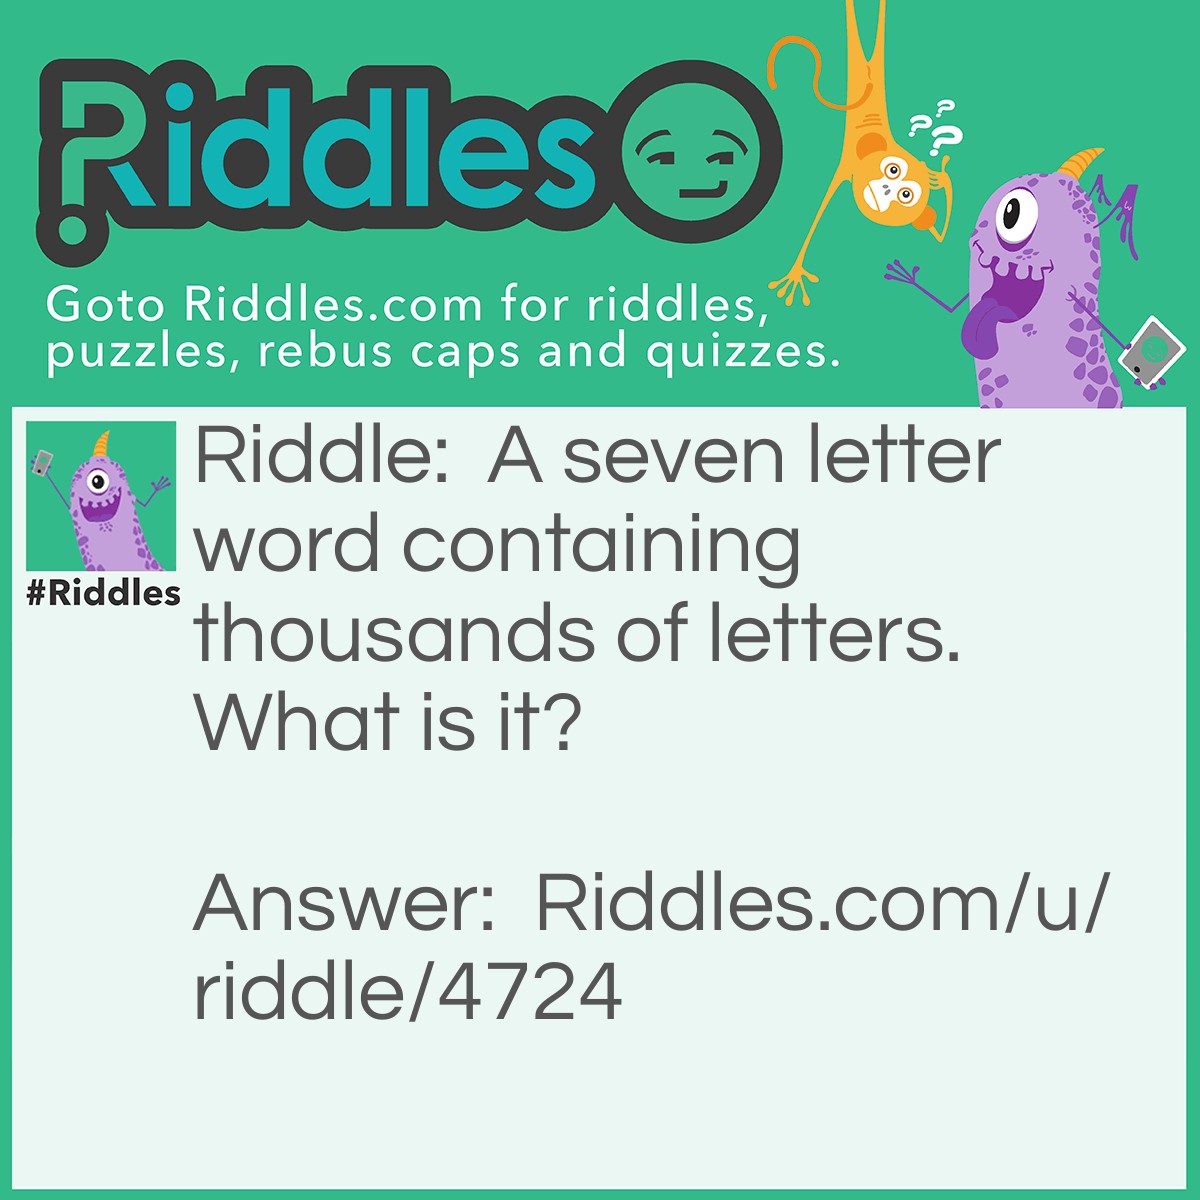 Riddle: A seven letter word containing thousands of letters. What is it? Answer: Mailbox.